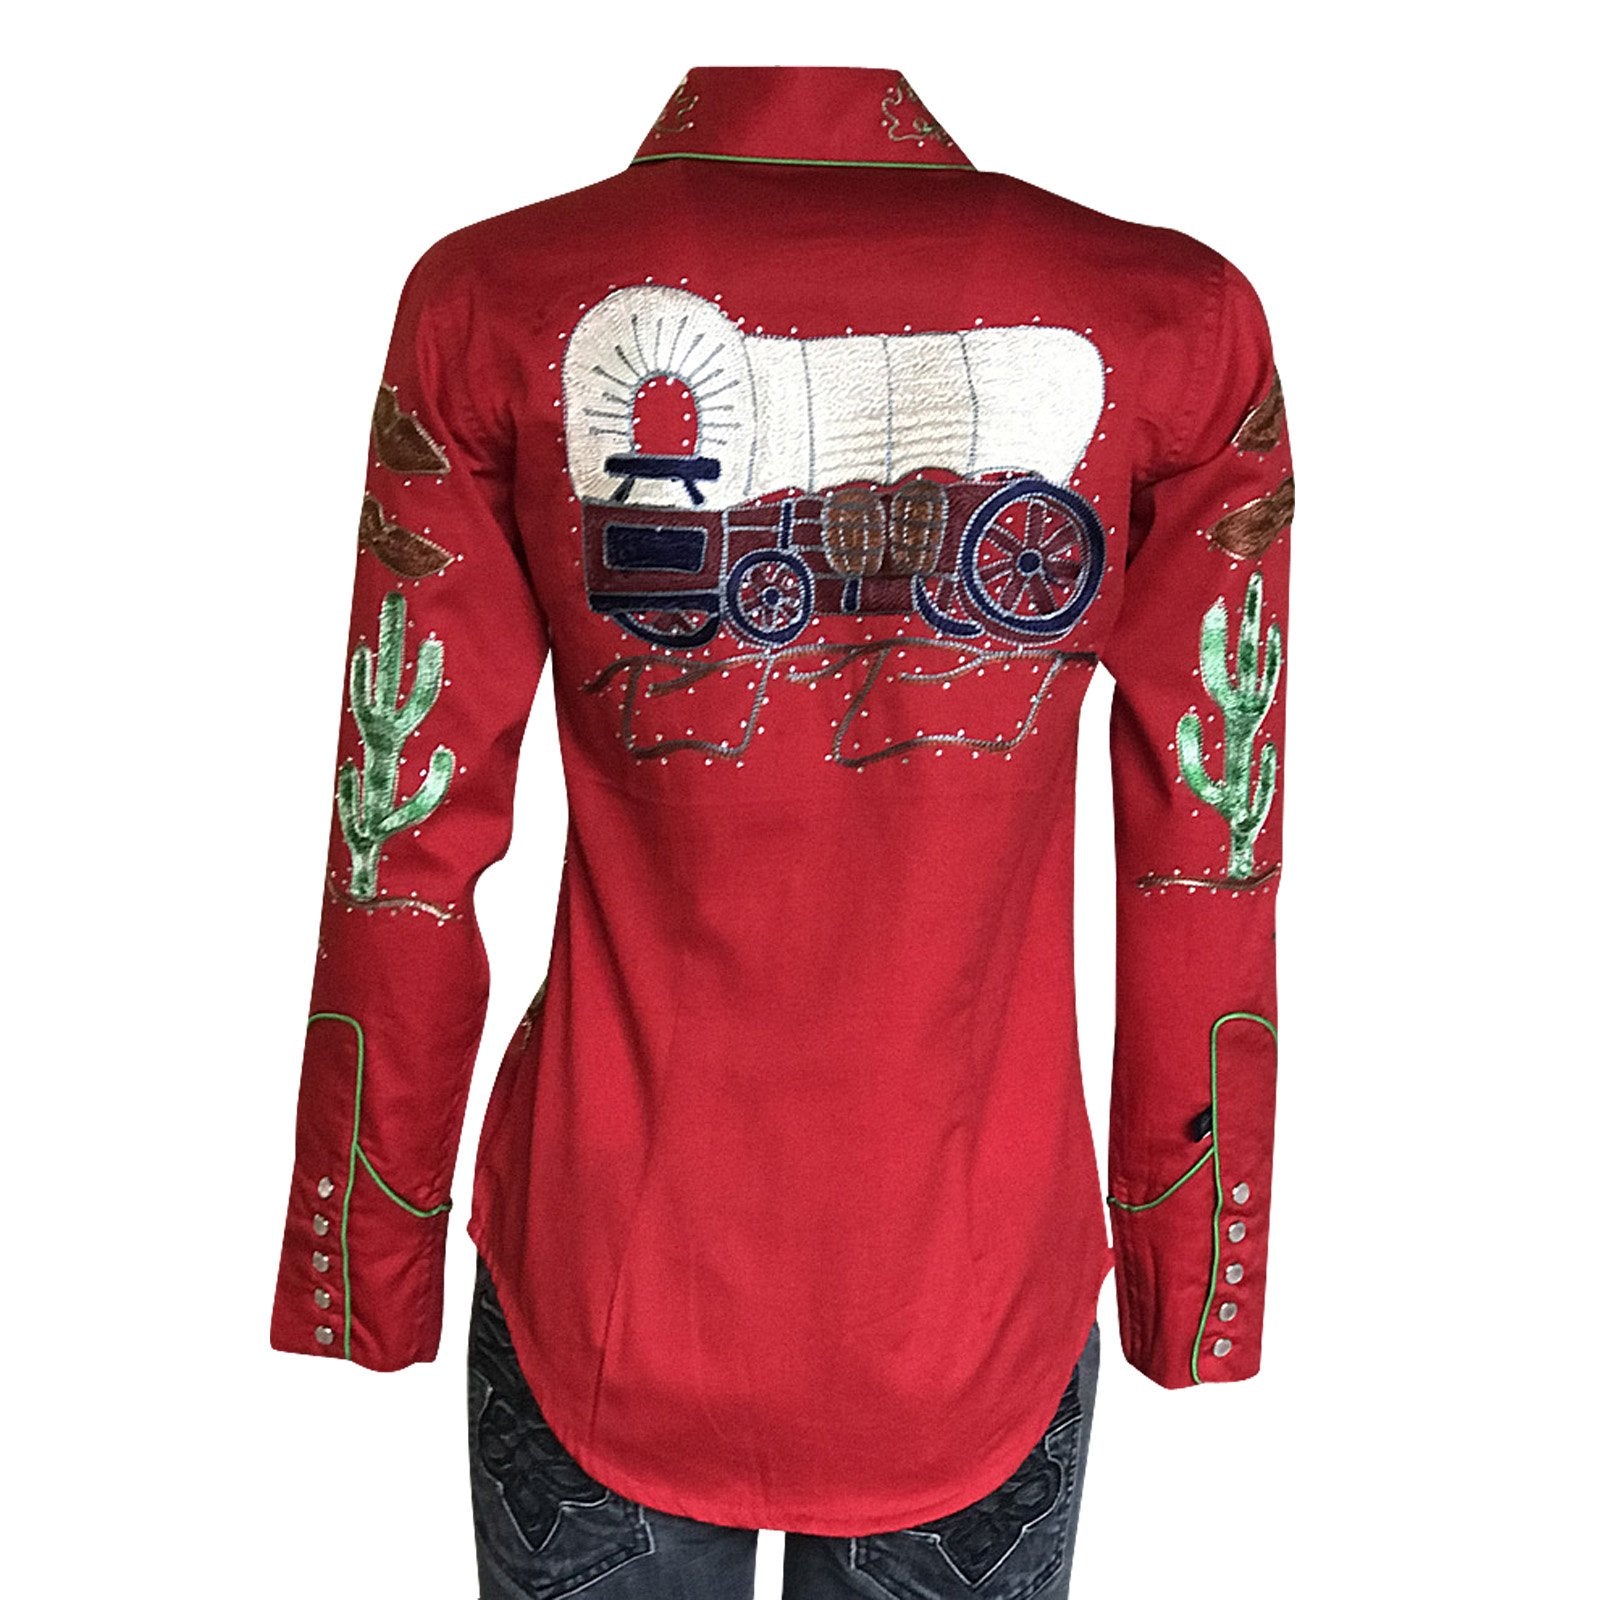 Rockmount Ranch Wear Ladies' #7755 Palm Trees Wagon Wheels Shirt Red Front